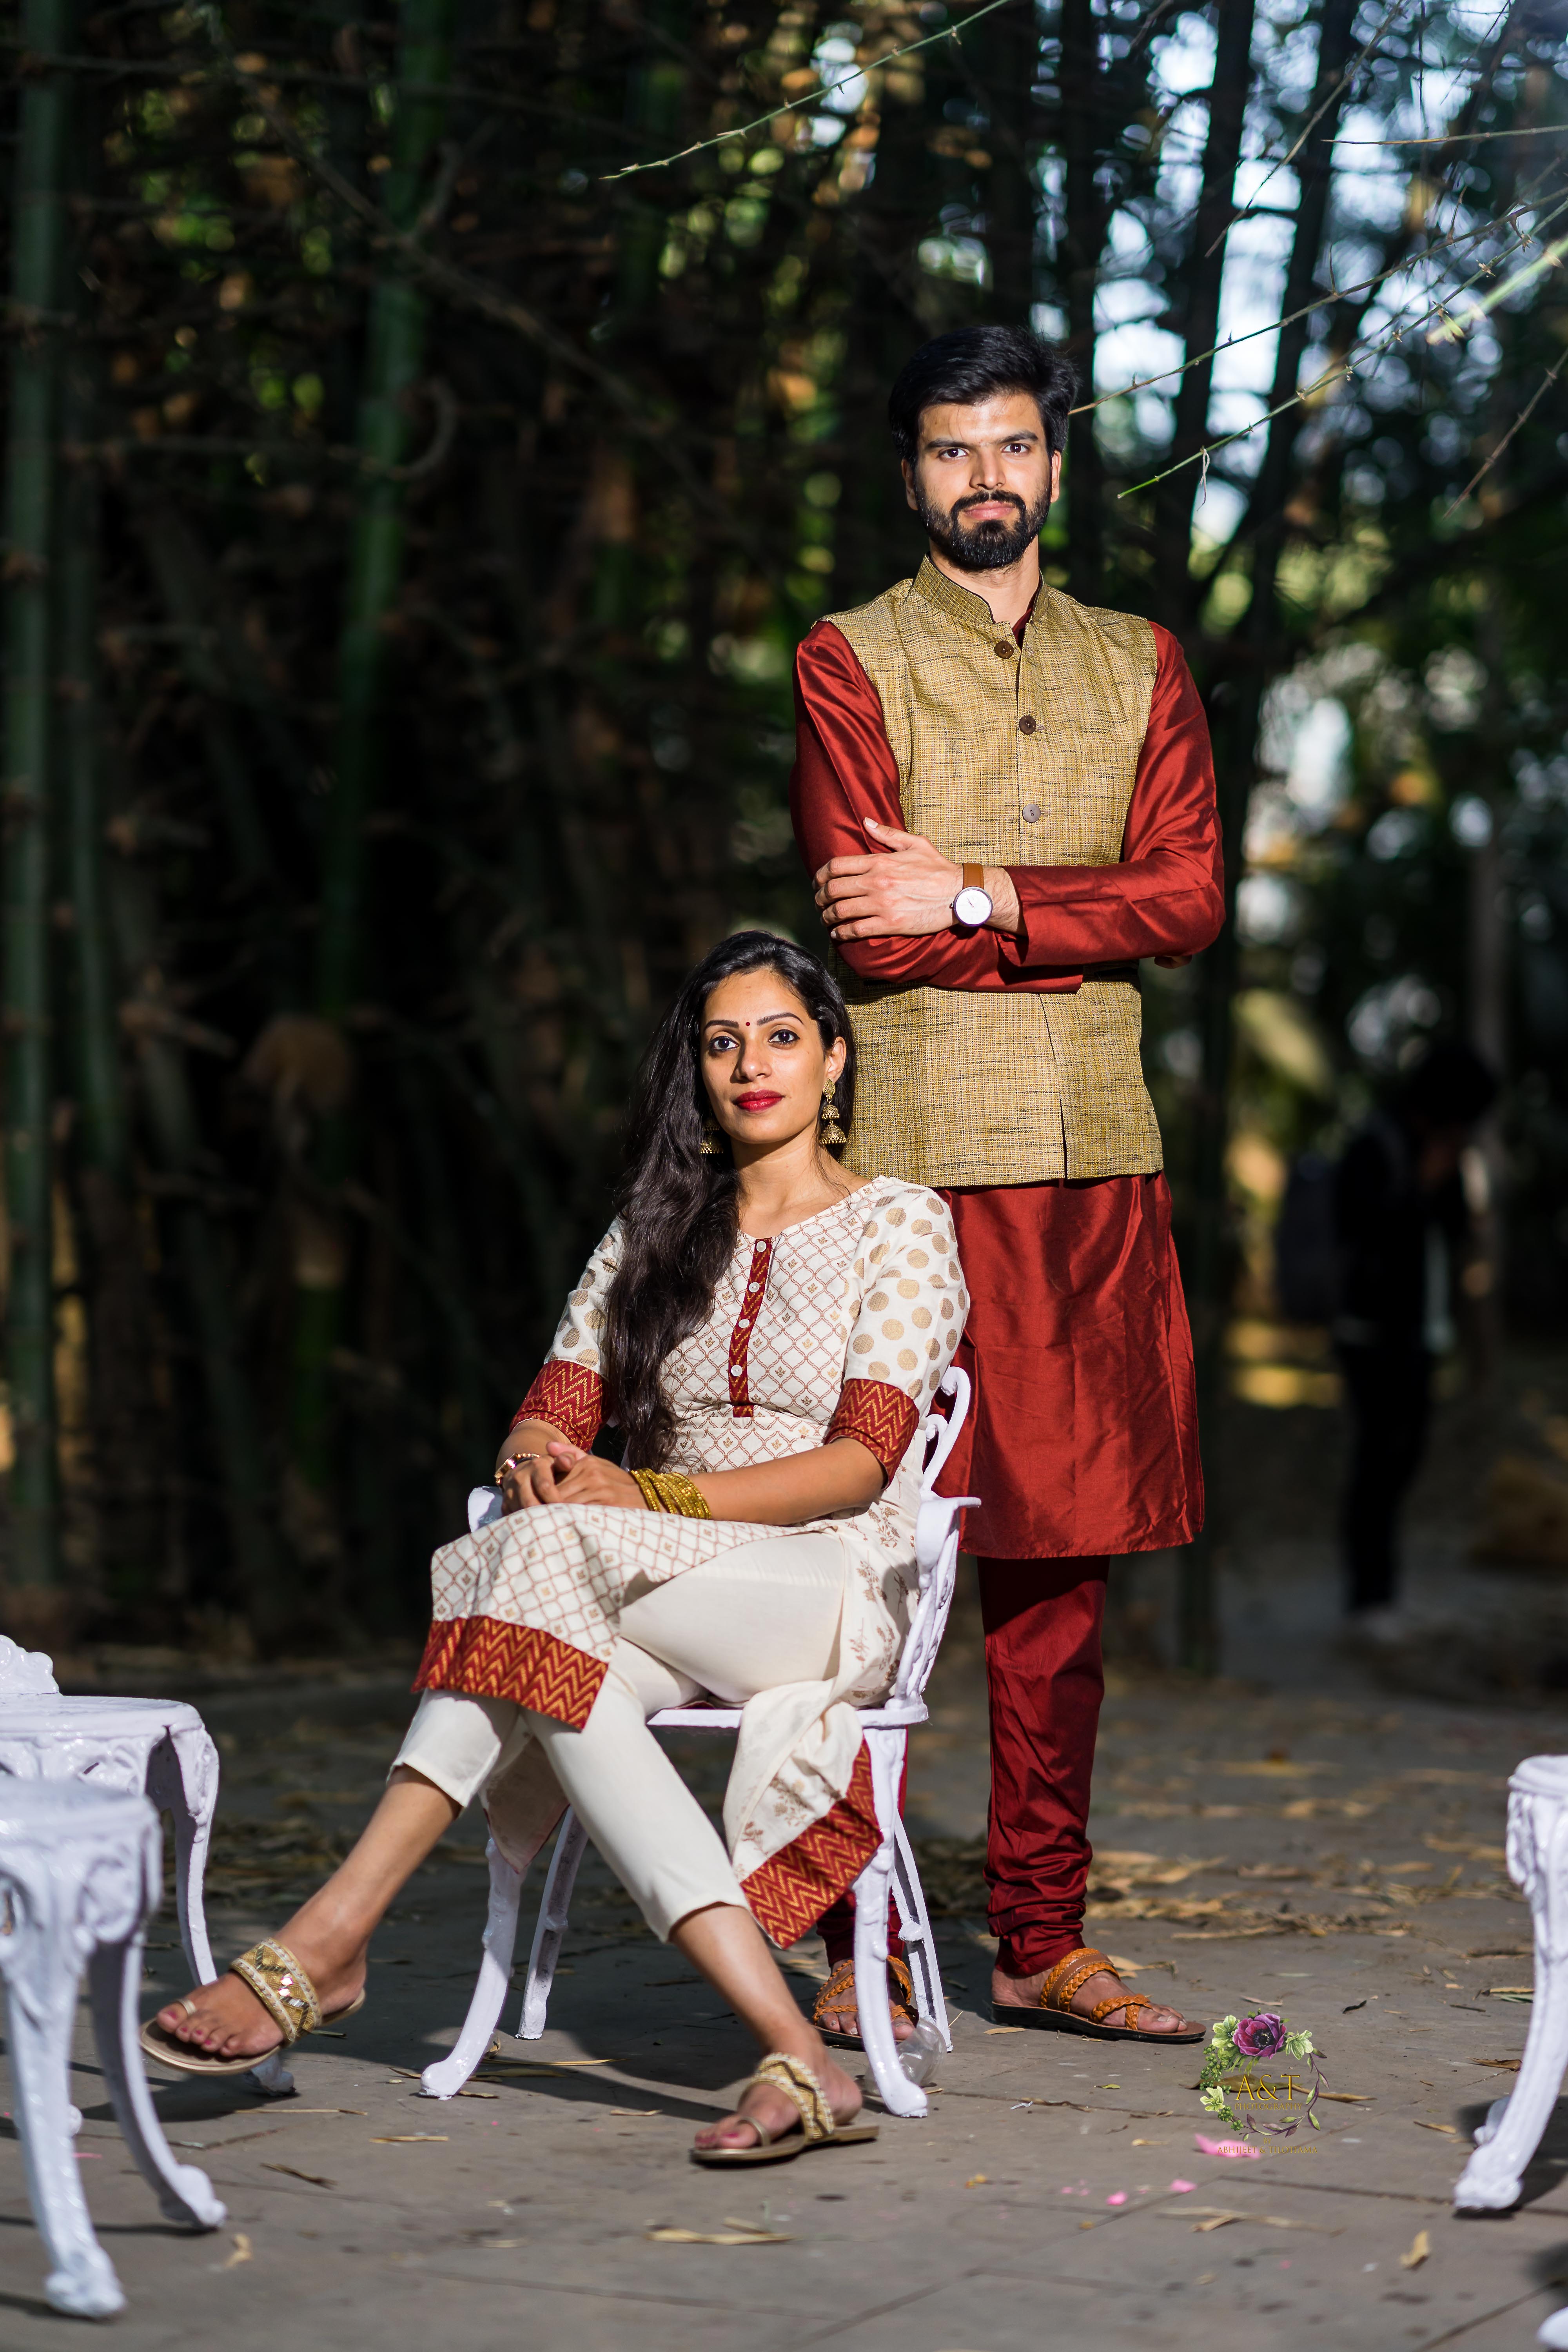 Heena-Vikas looking all Royal with these chairs for their Pre-wedding Photoshoot